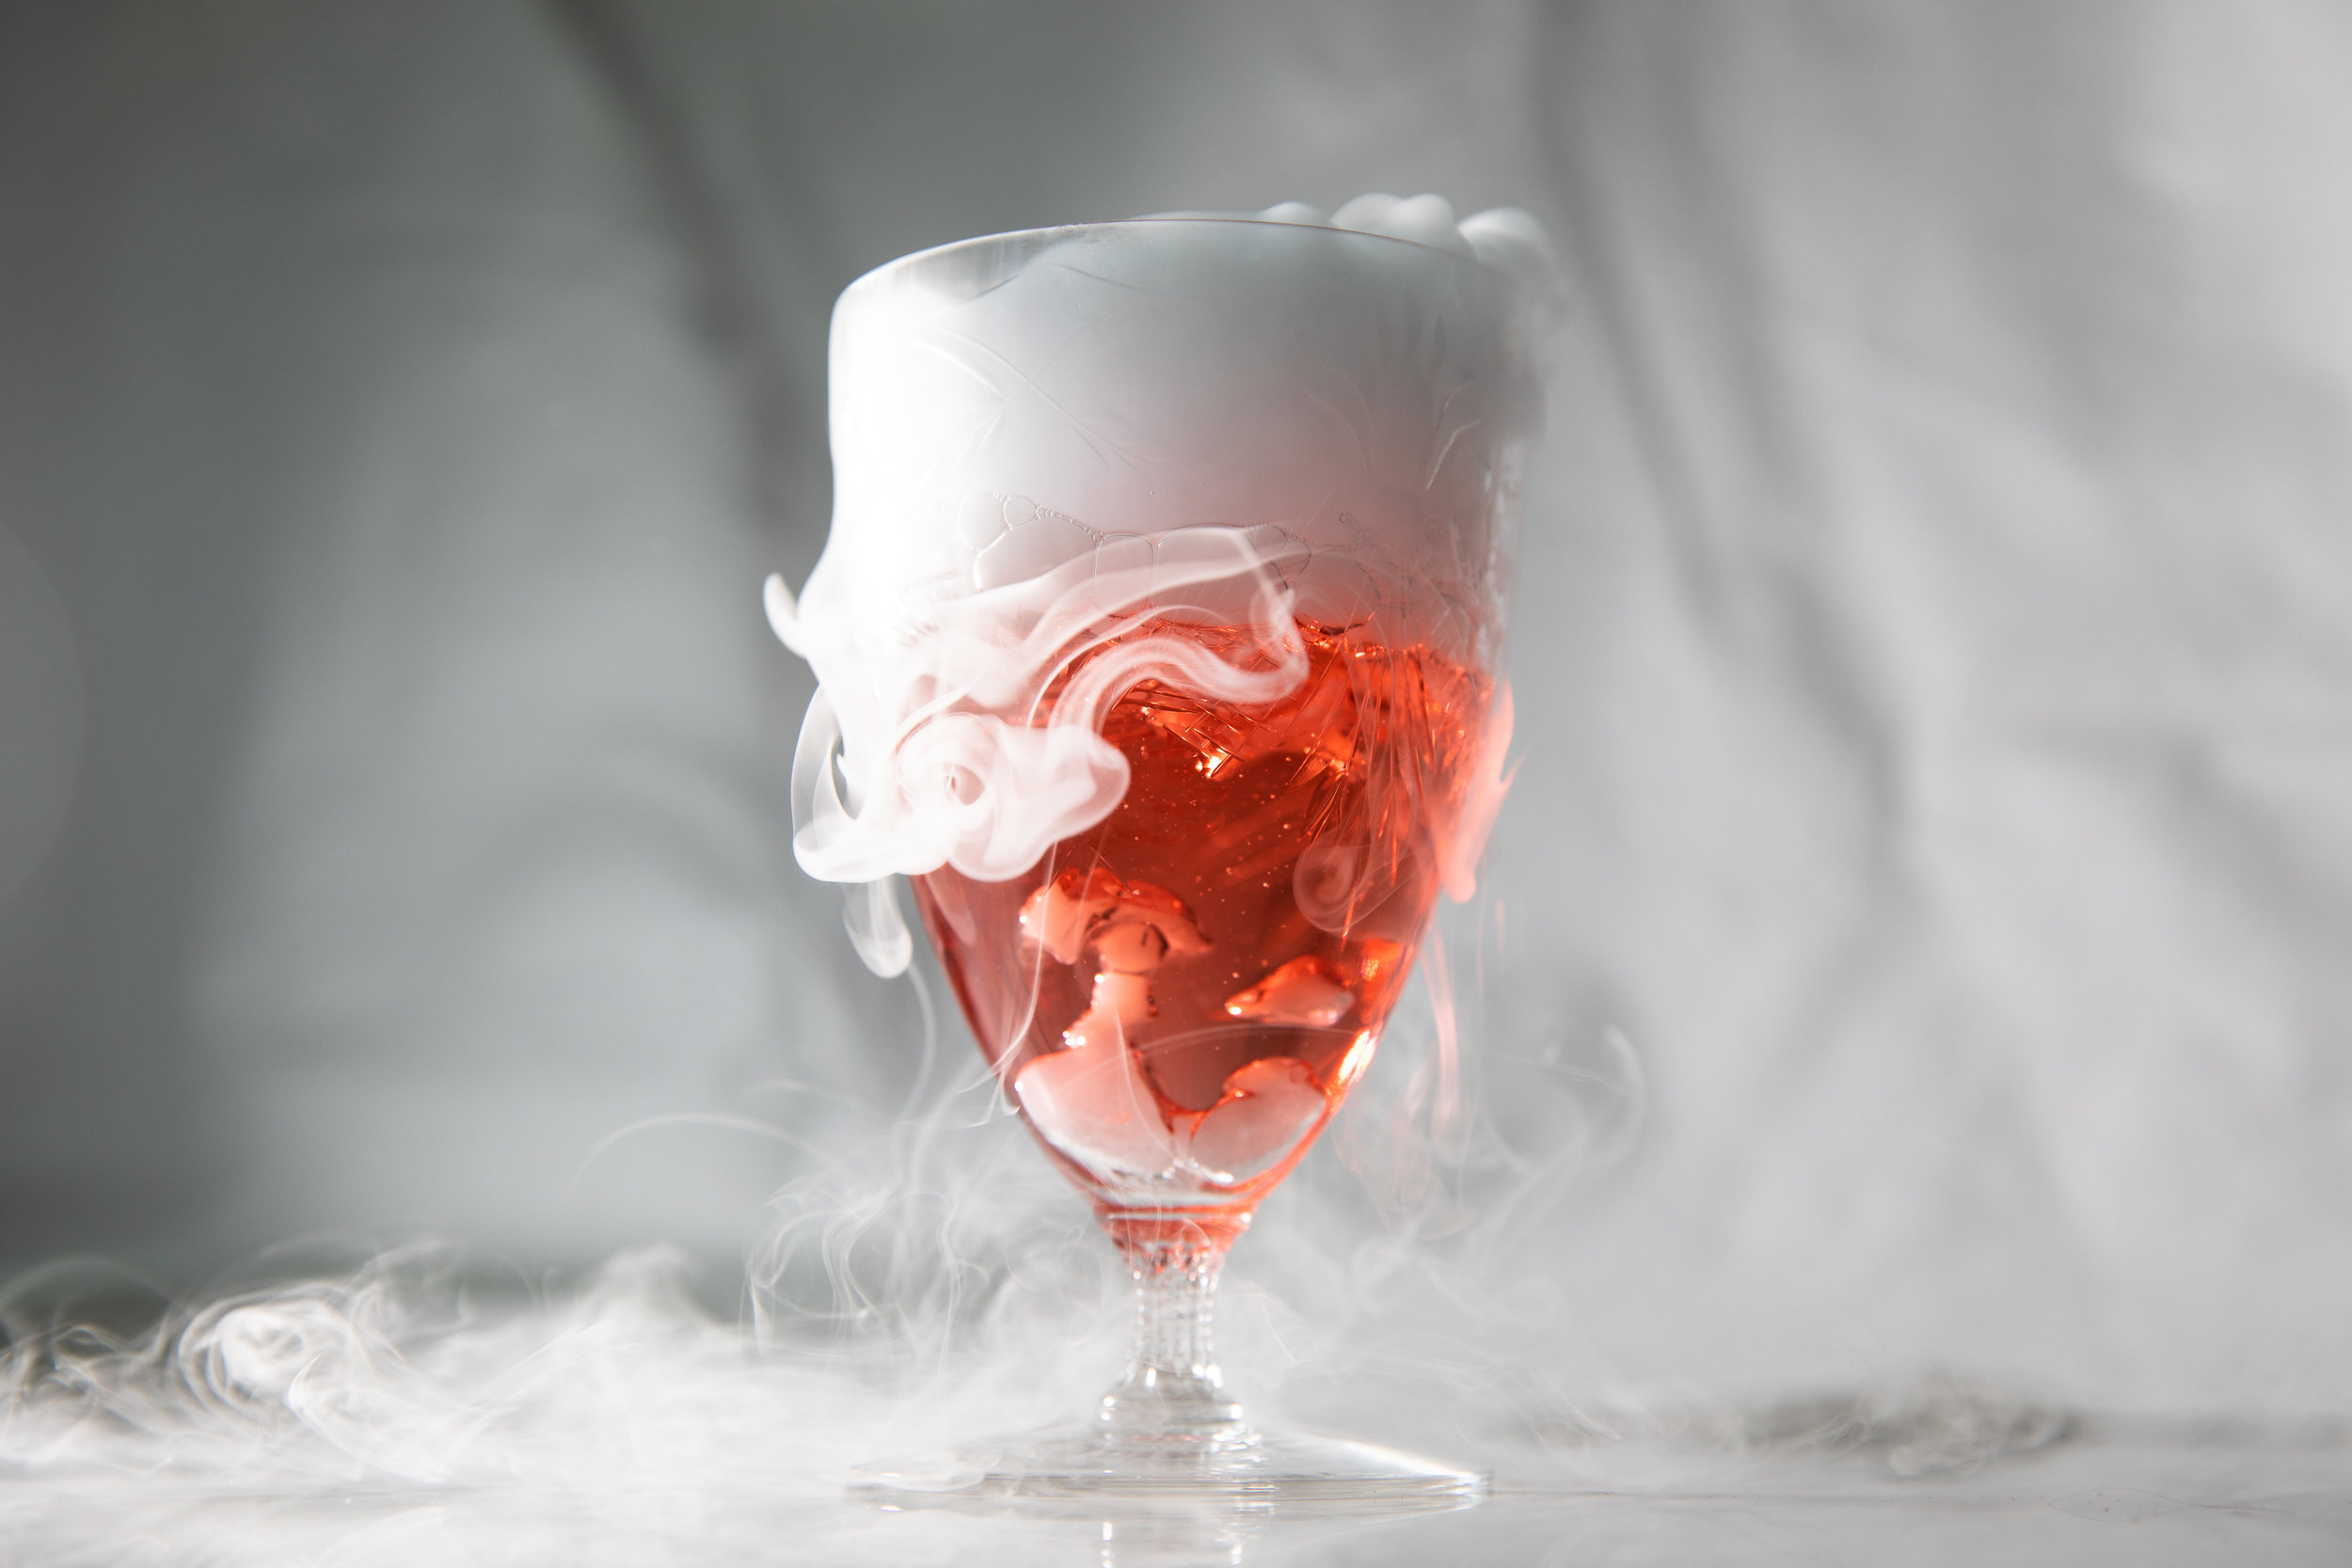 Everything You Need For a Halloween Dry Ice Photography Shoot